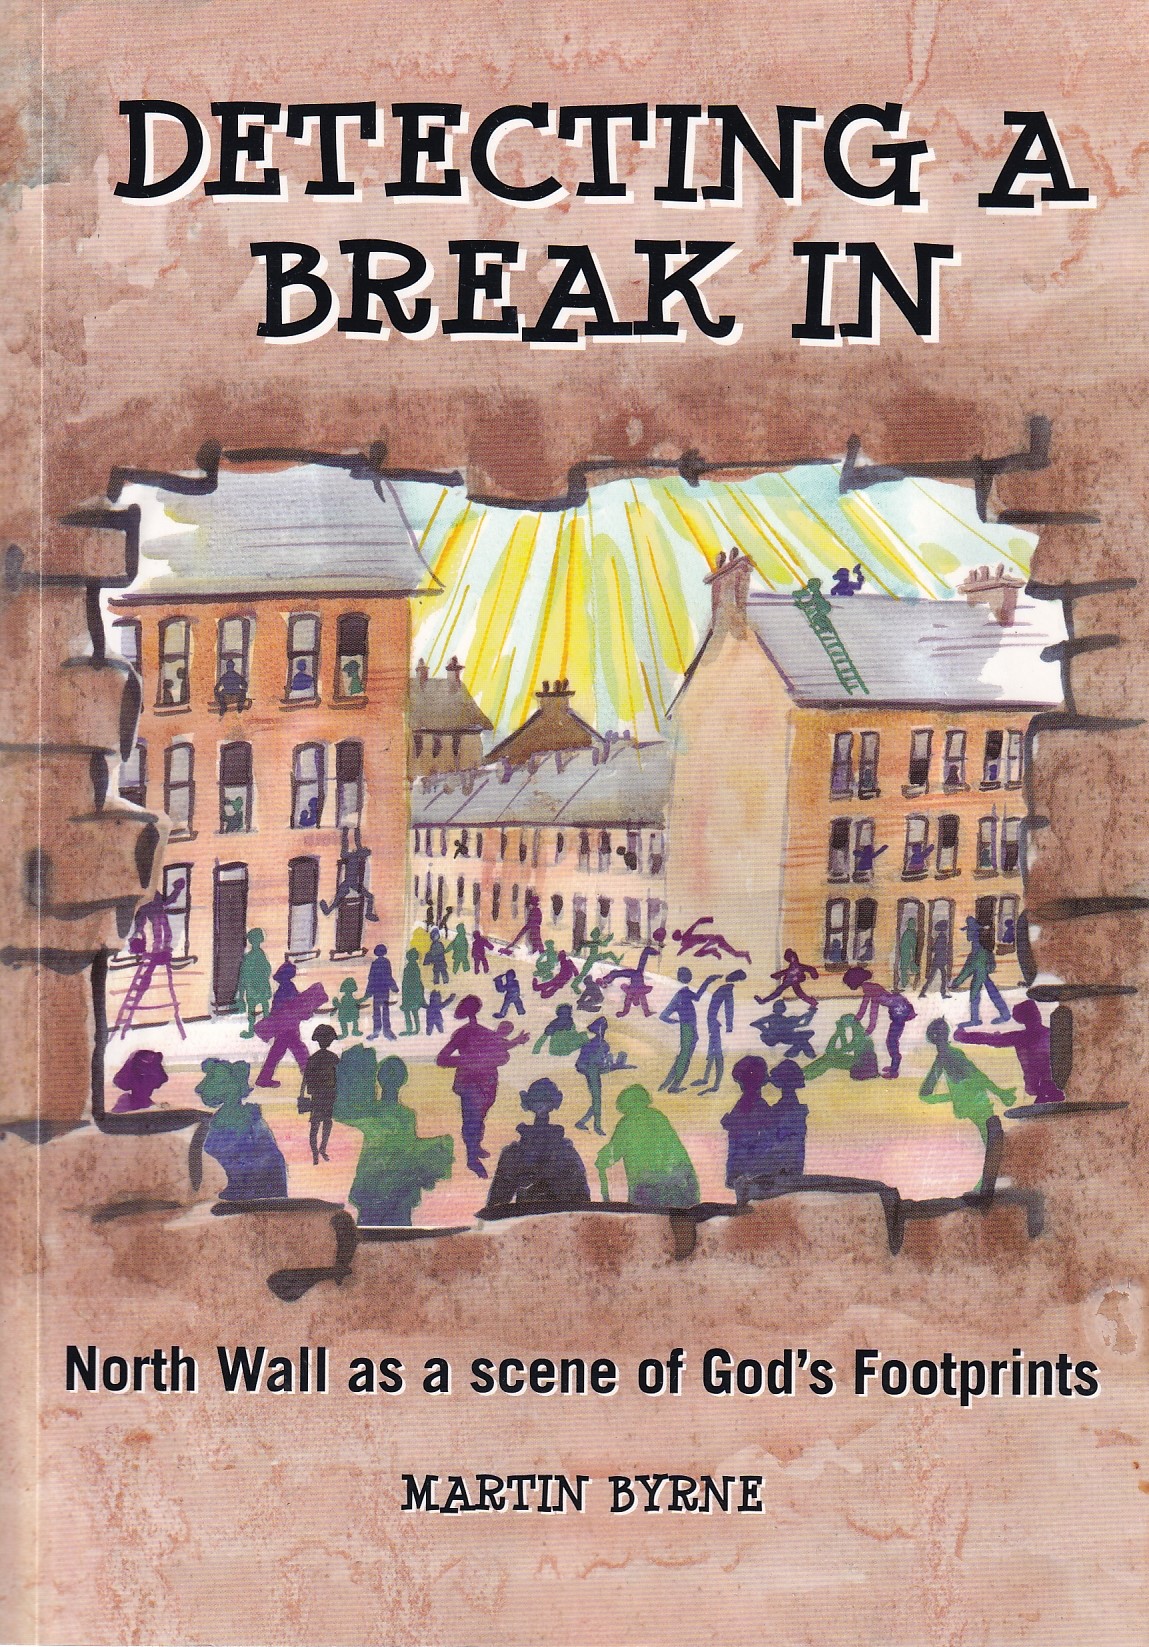 Detecting A Break In: North Wall as a scene of God’s Footprints | Martin Byrne | Charlie Byrne's